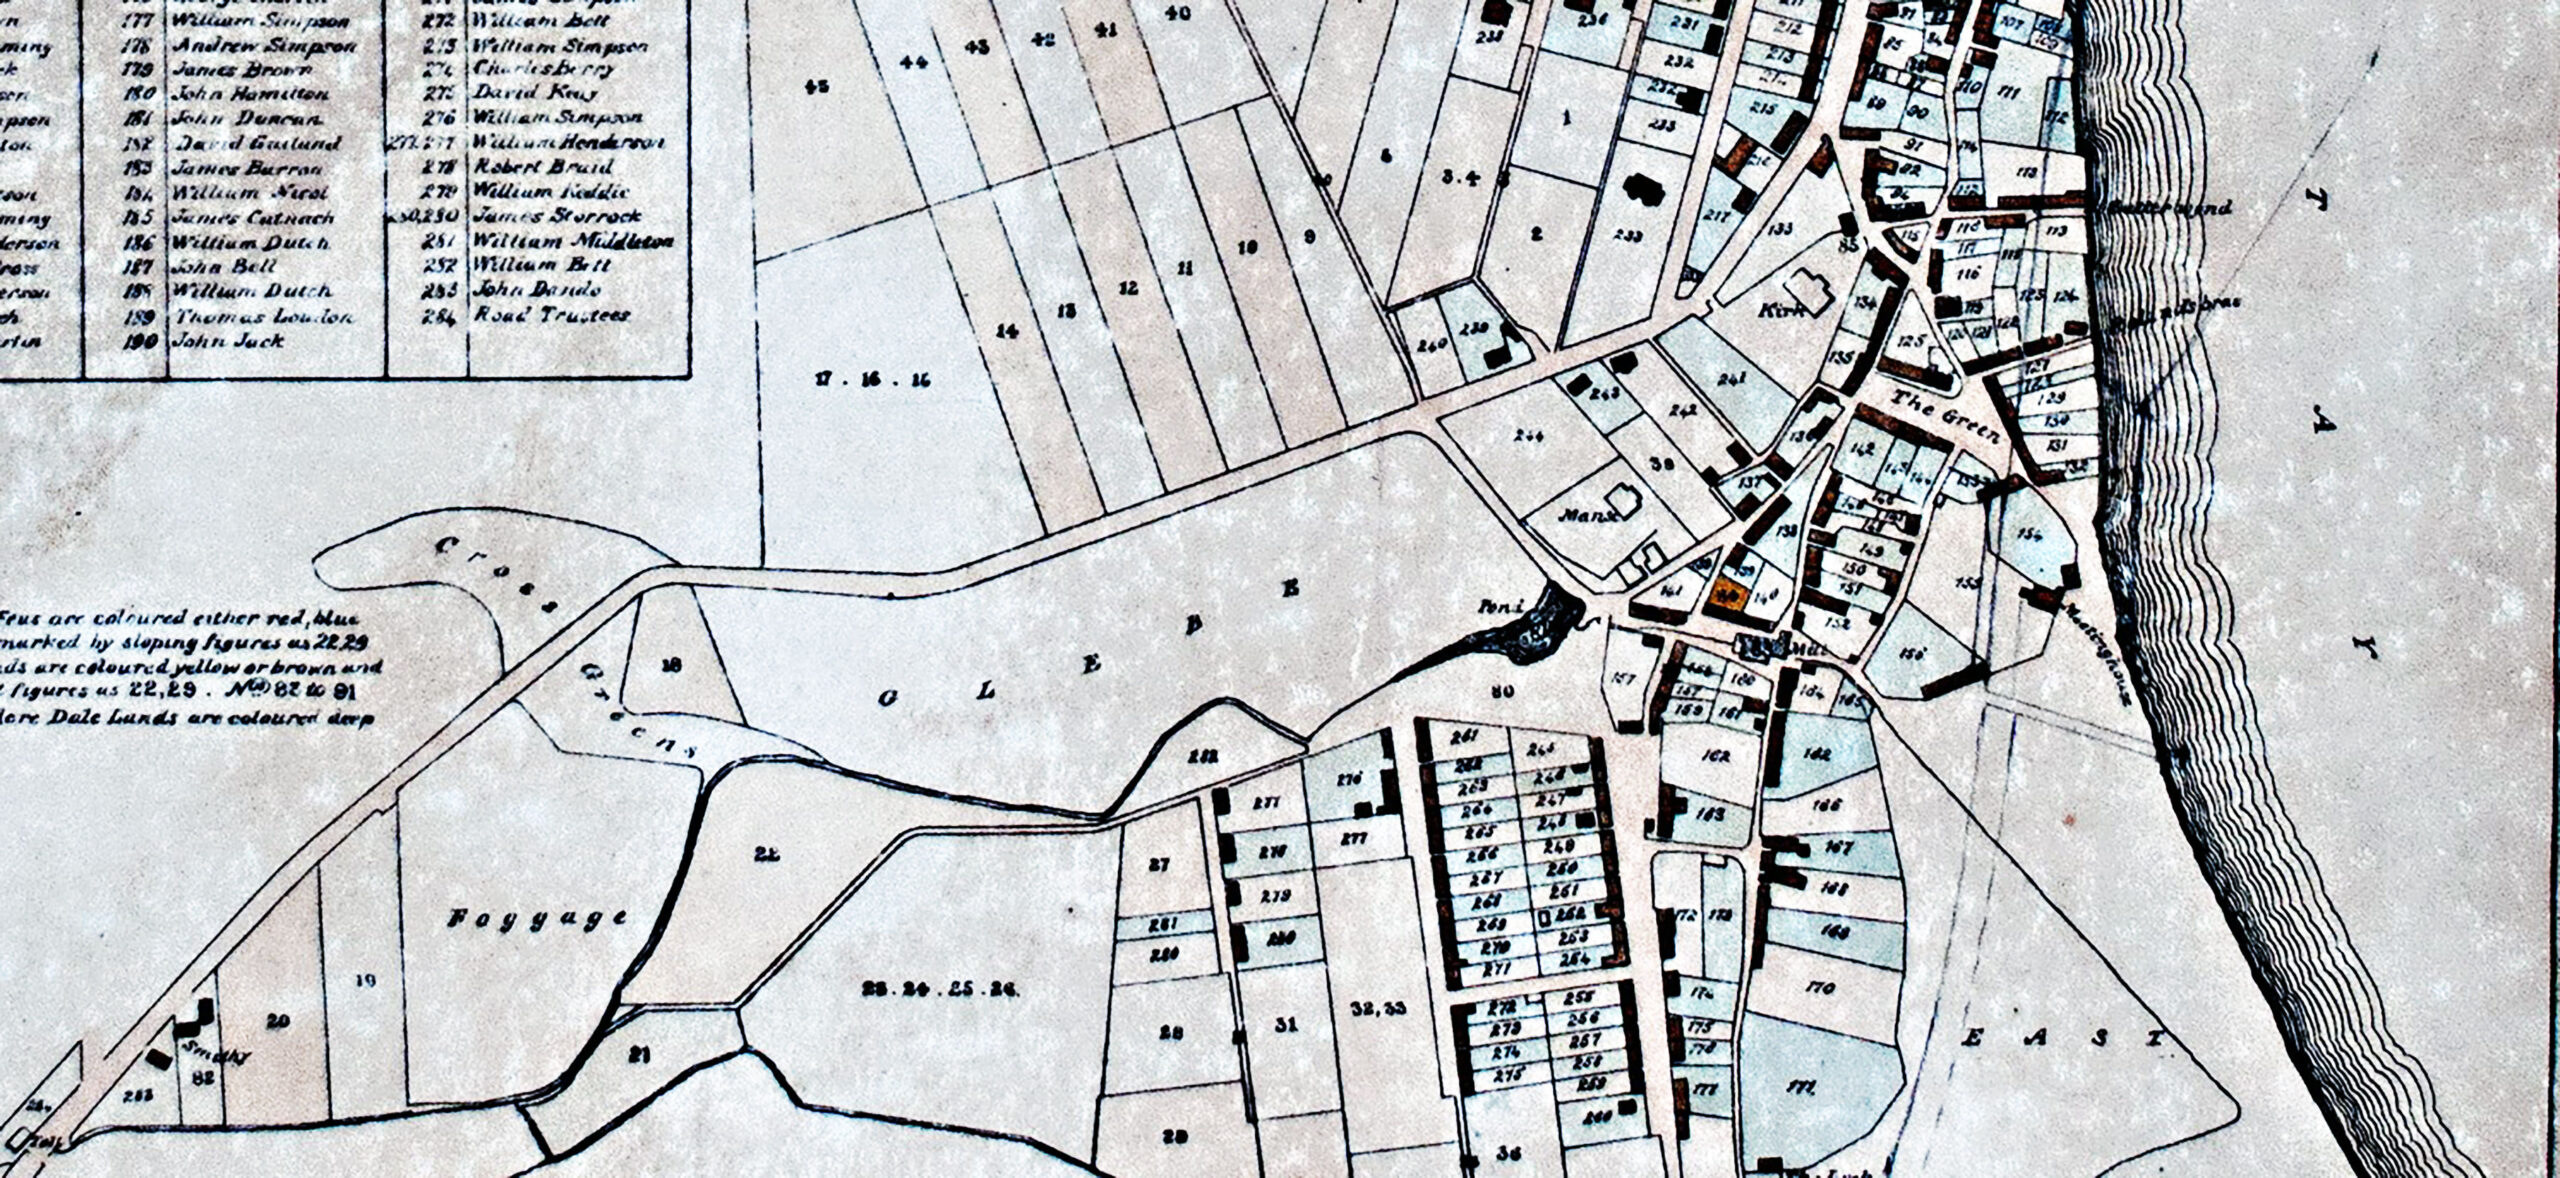 Tayport Heritage Trail - Board 12 - 1830s feu map showing the common land named as Cross Greens